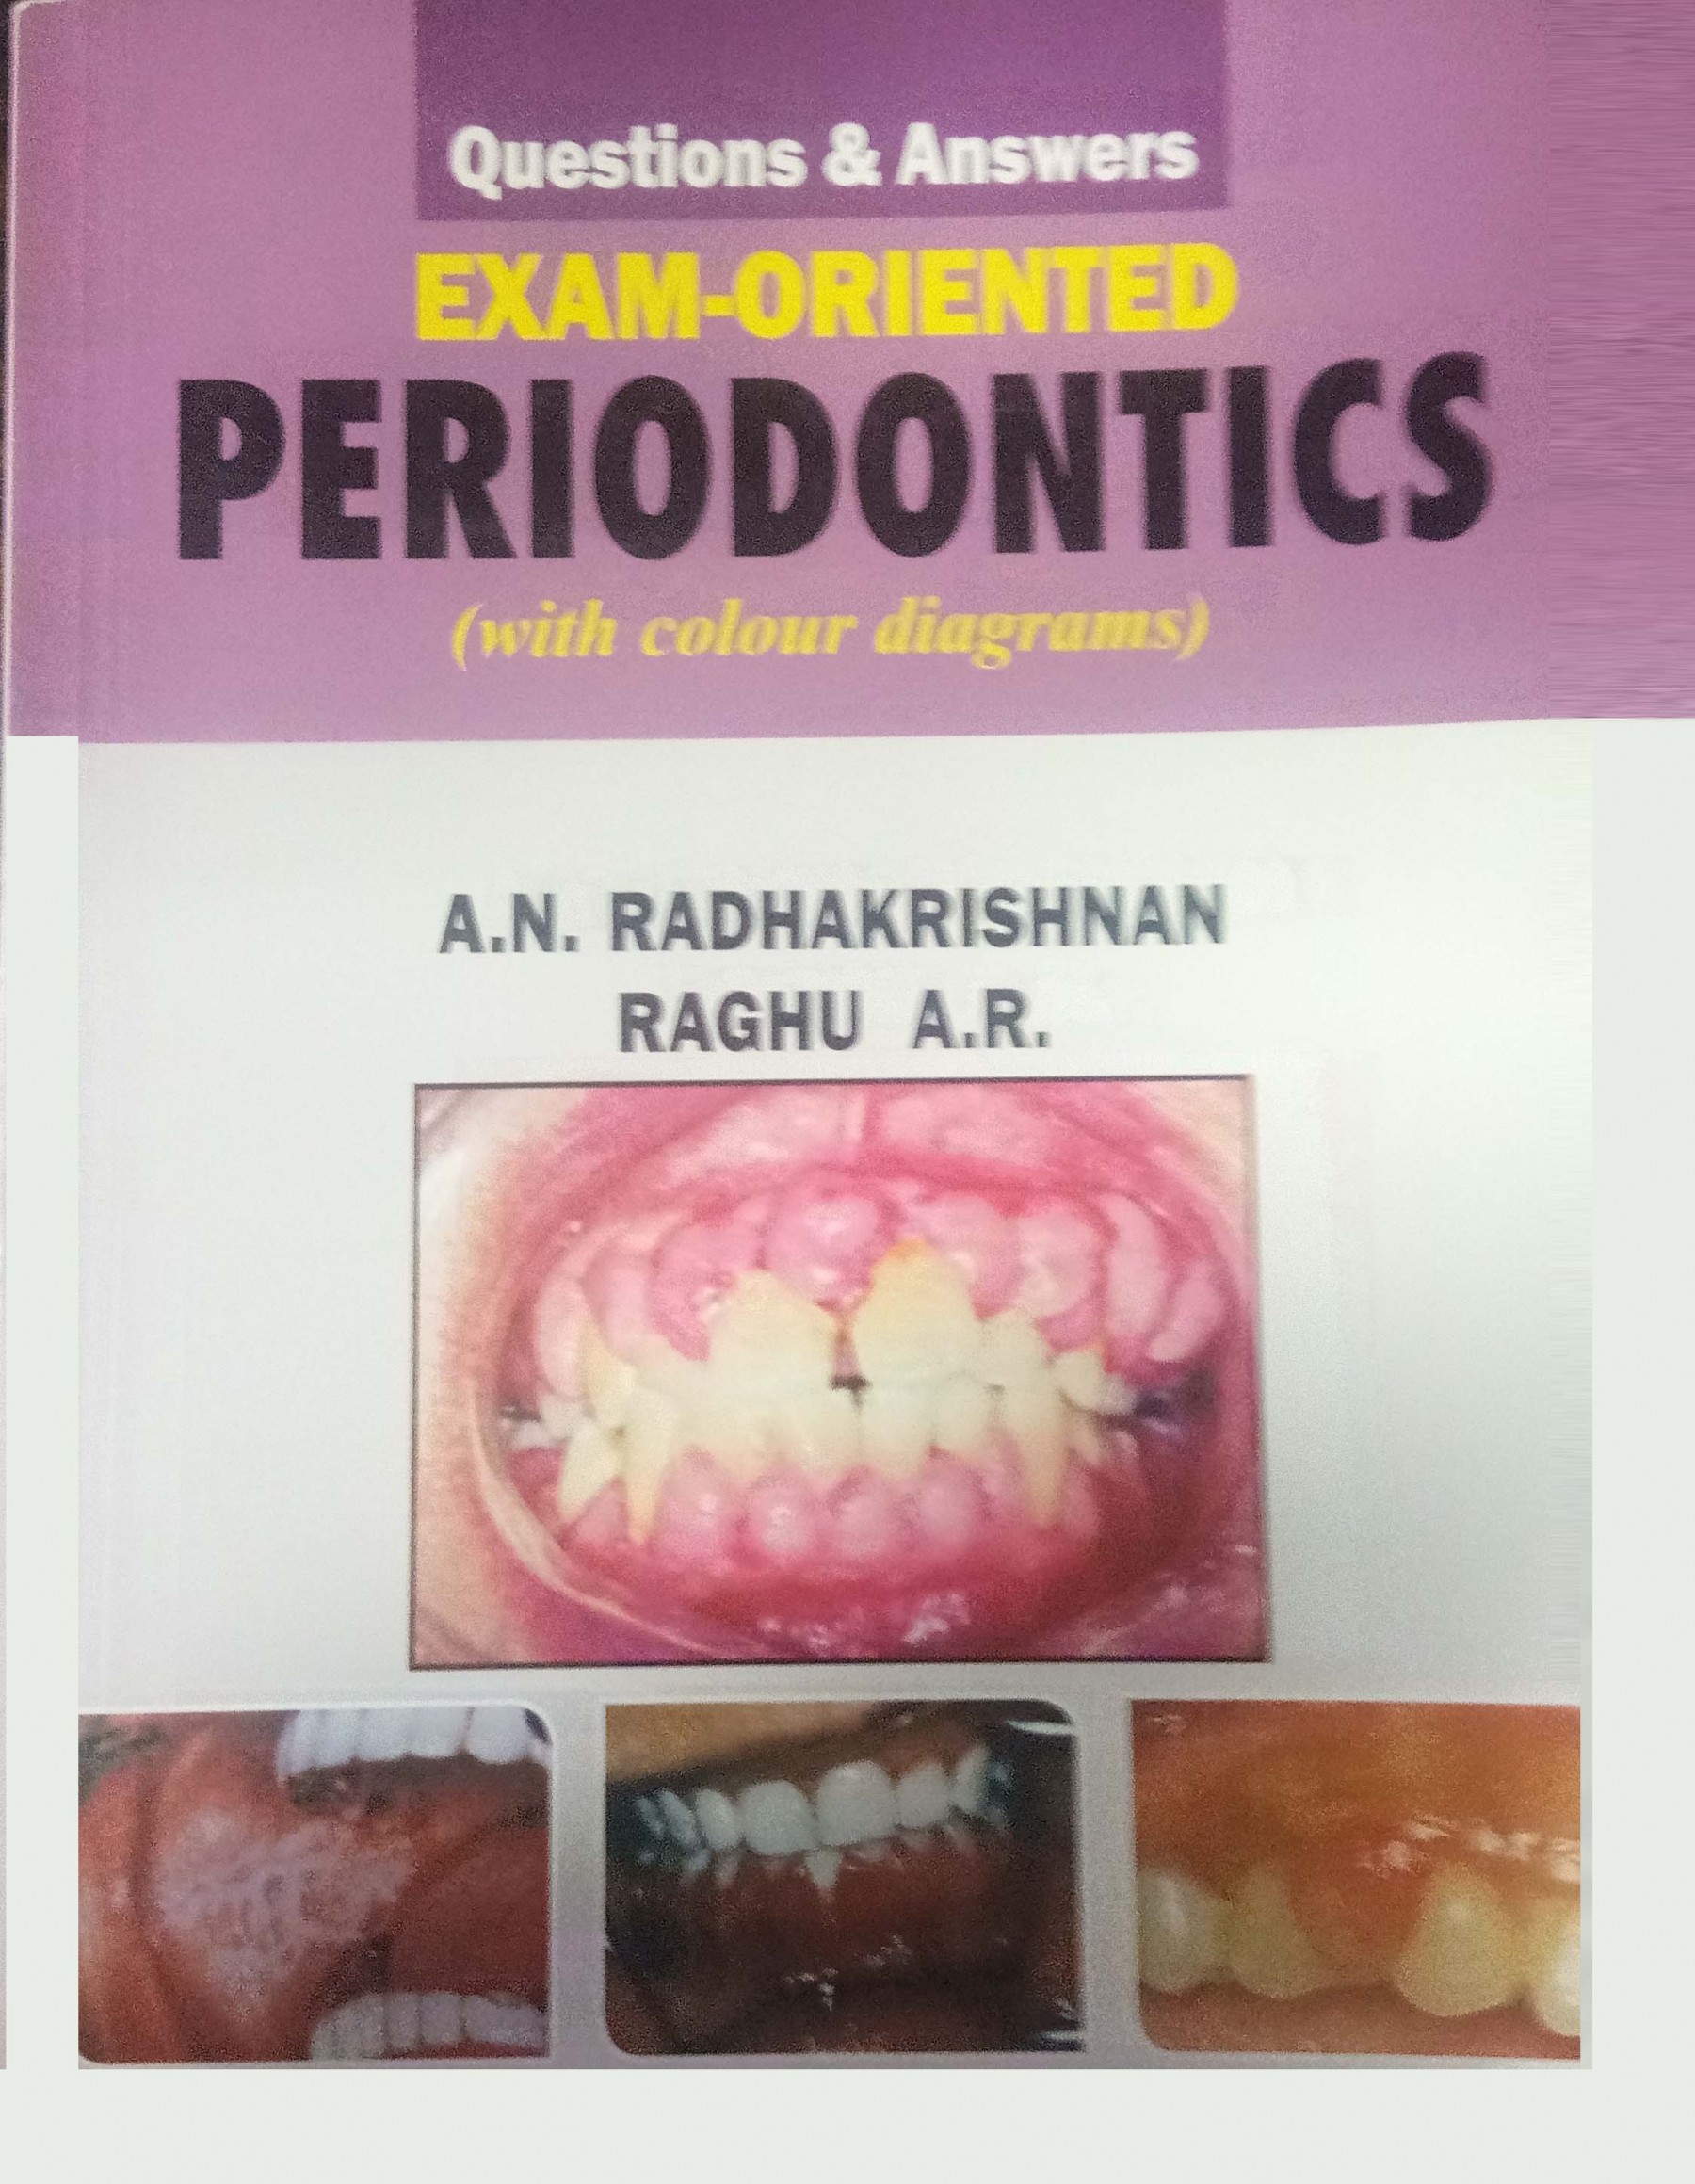 Questions & Answers Exam-Oriented Periodontics (With Colour Diagrams)